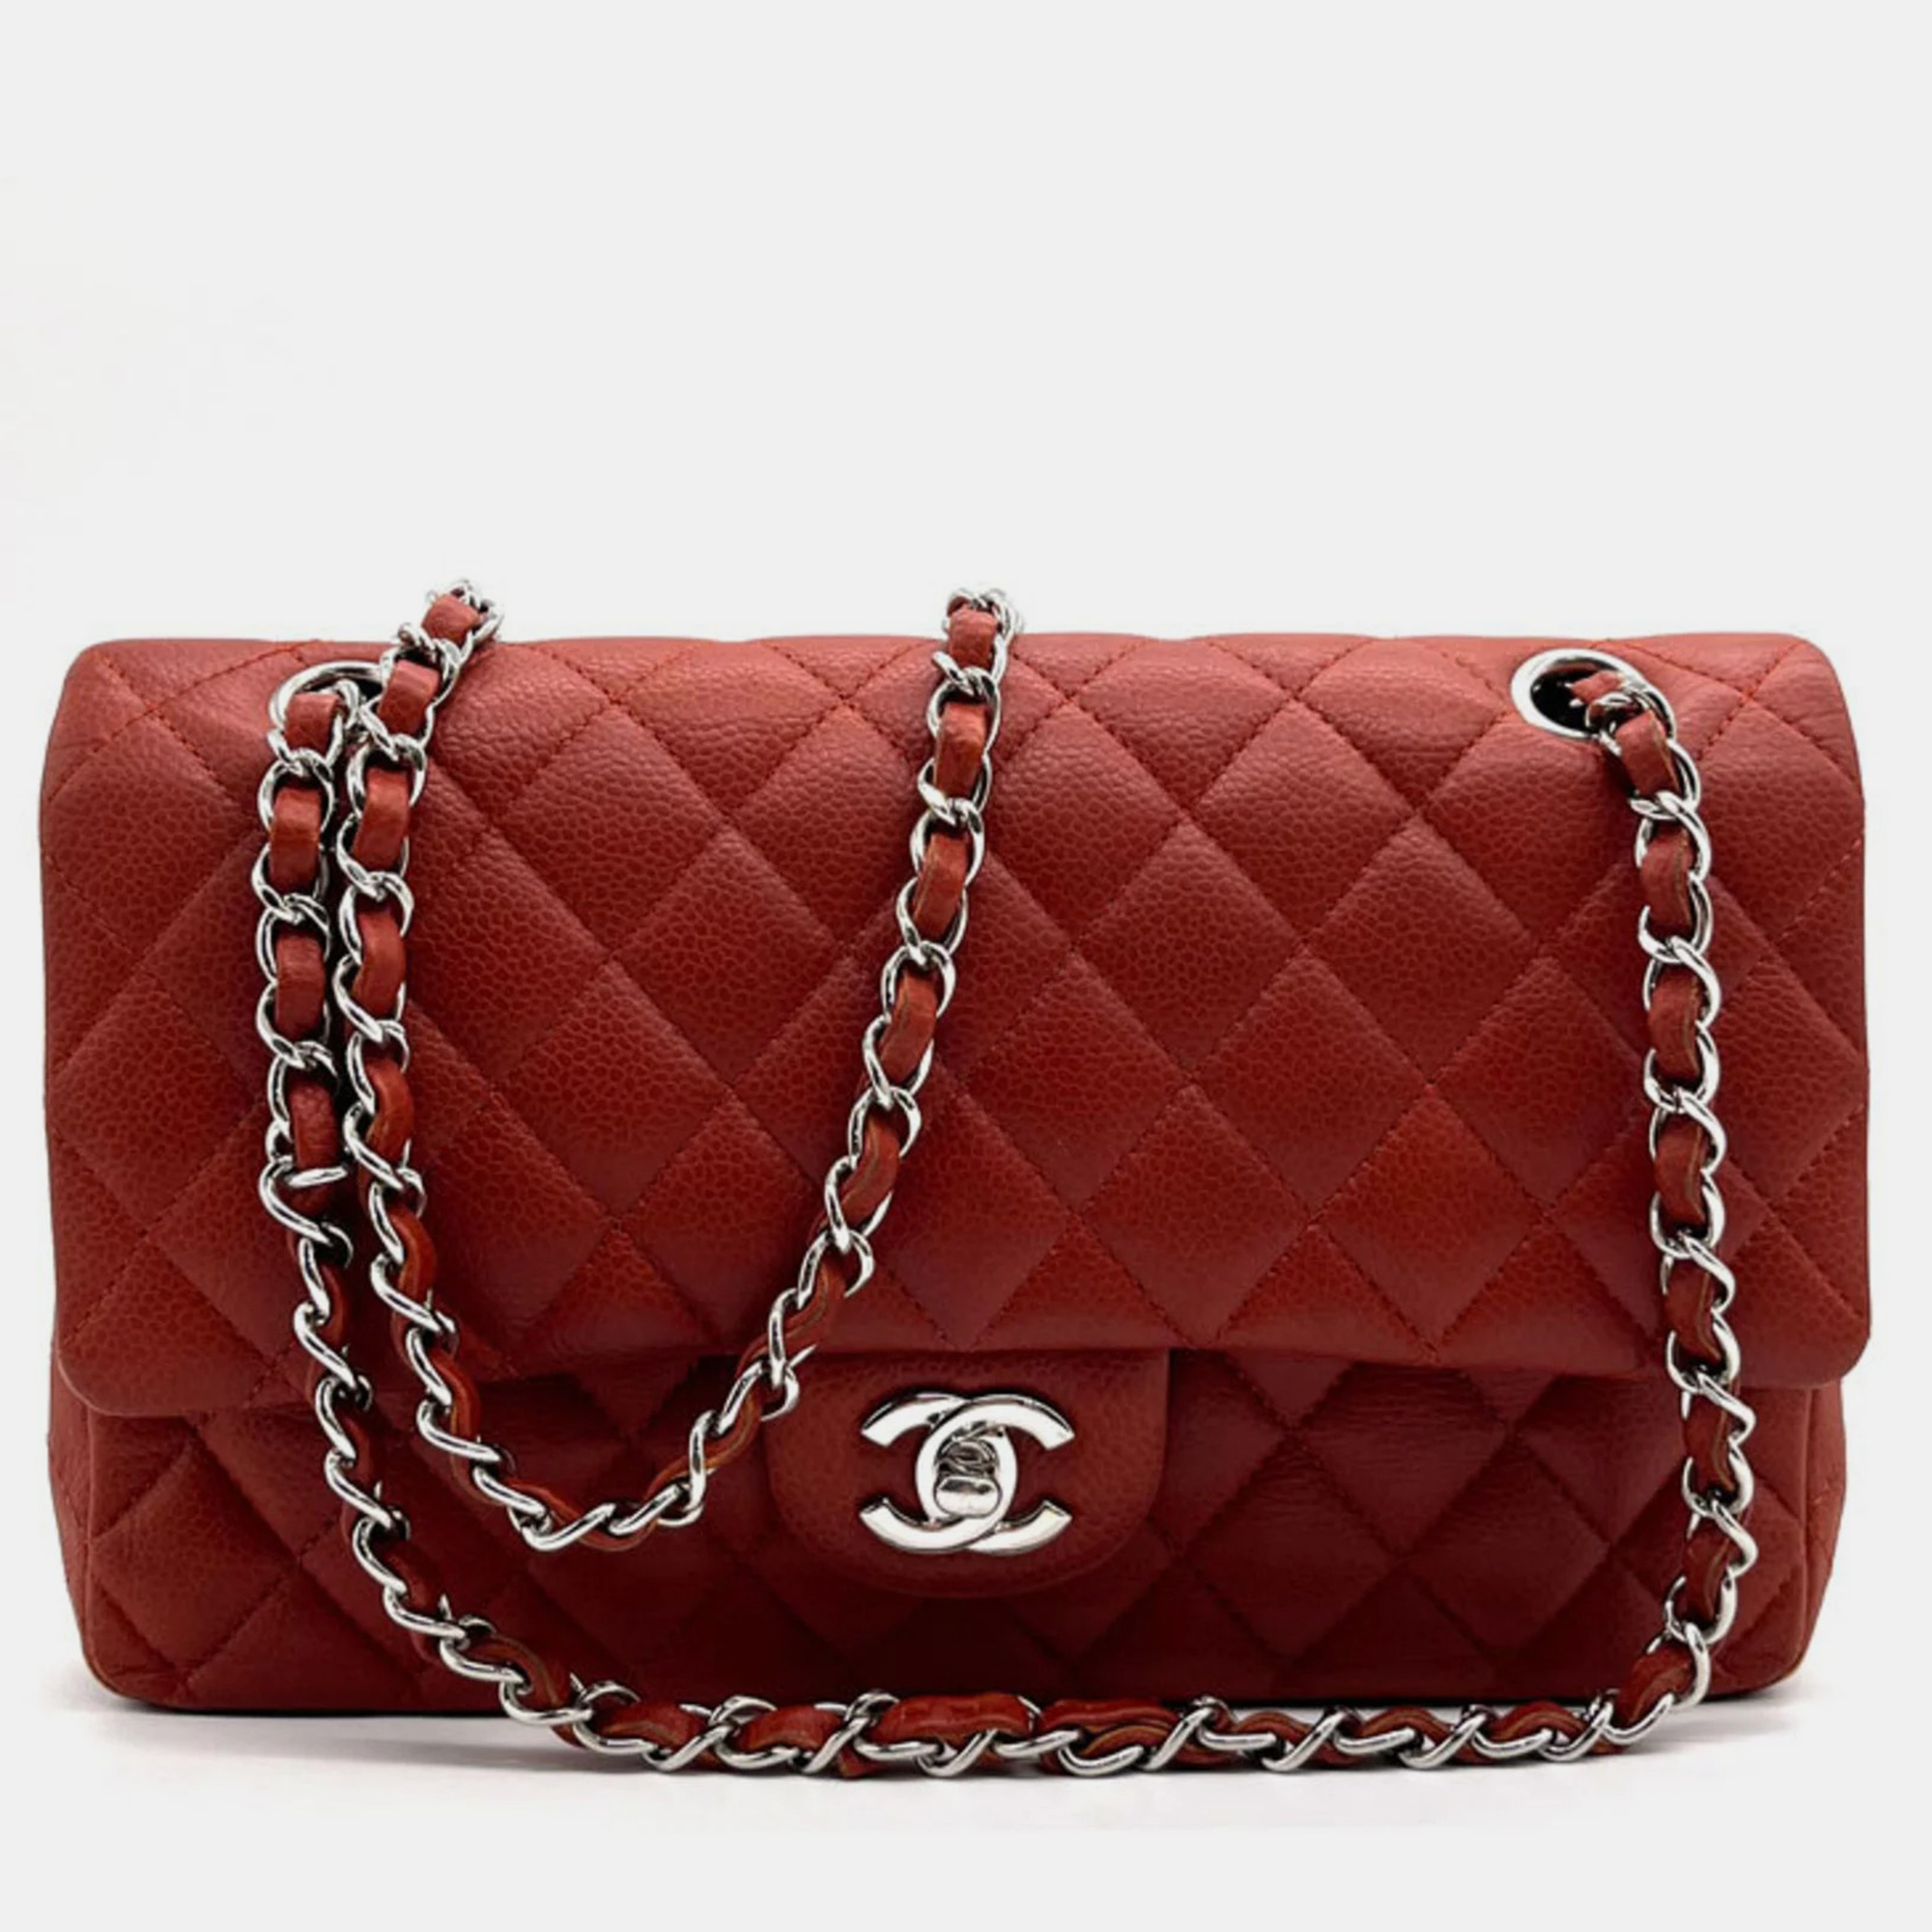 Chanel red lambskin leather medium classic double flap shoulder bags